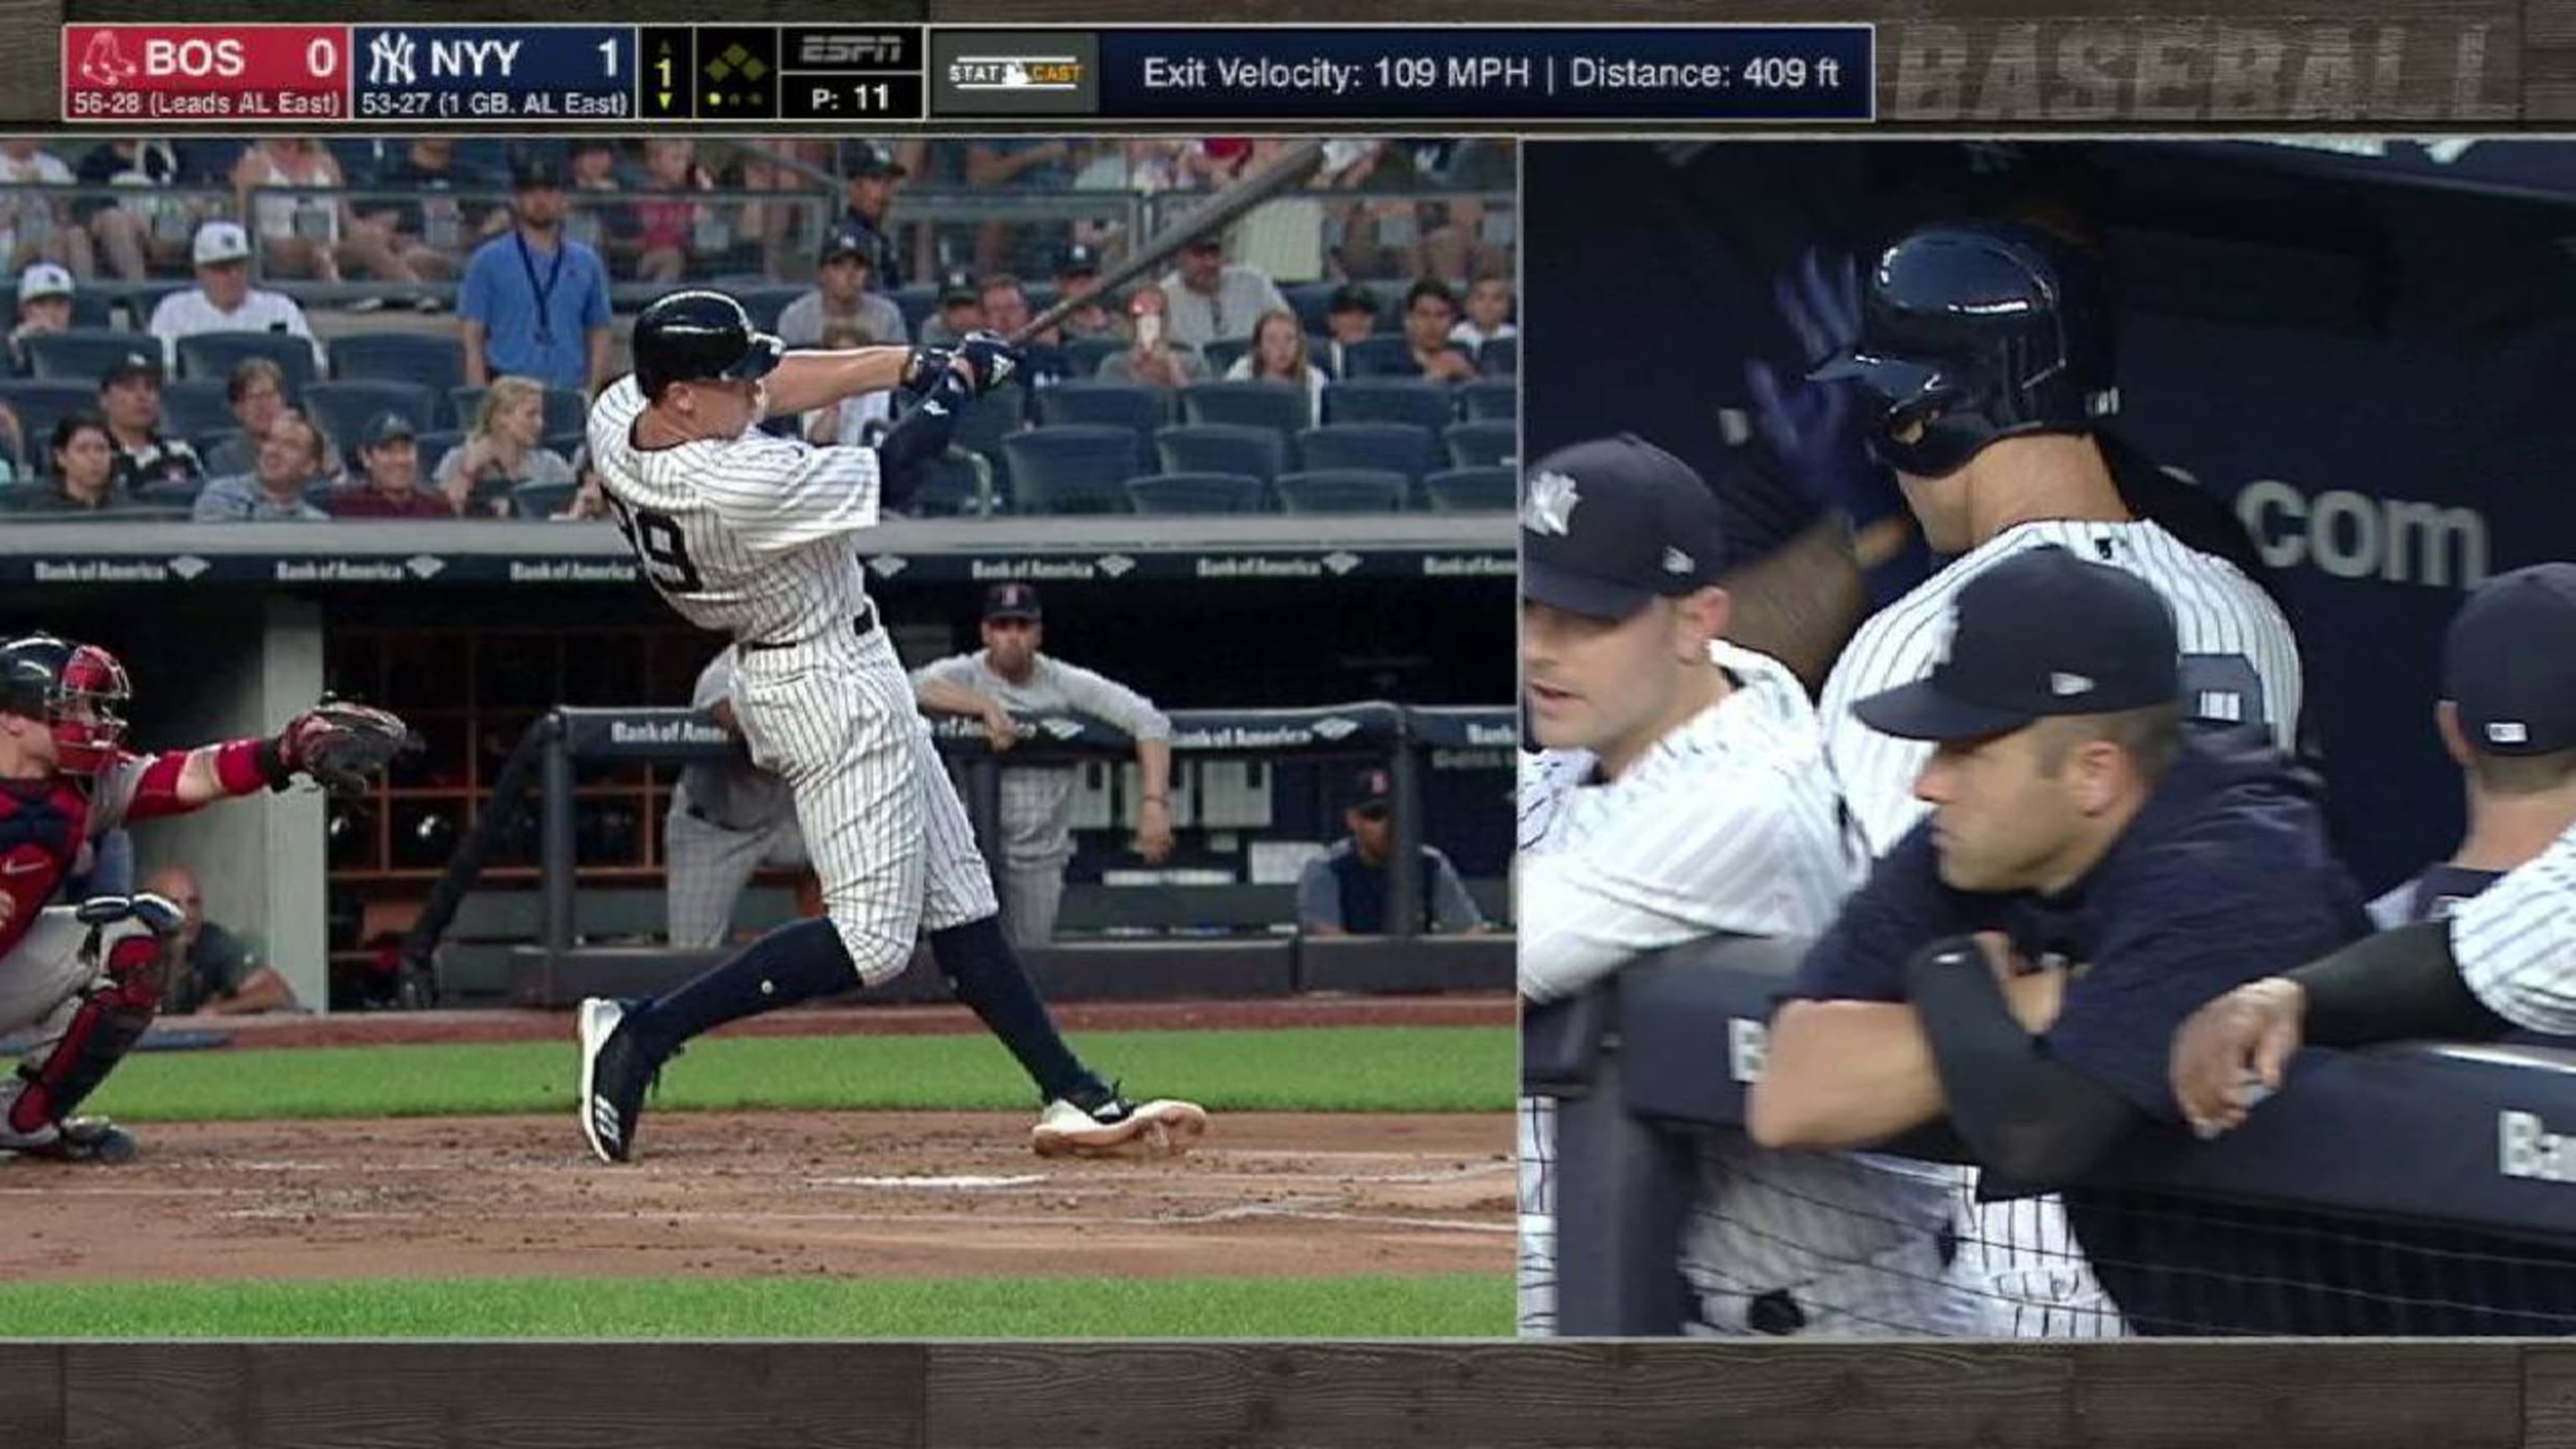 Aaron Judge adds home runs No. 56 & 57 in his pursuit of Babe Ruth